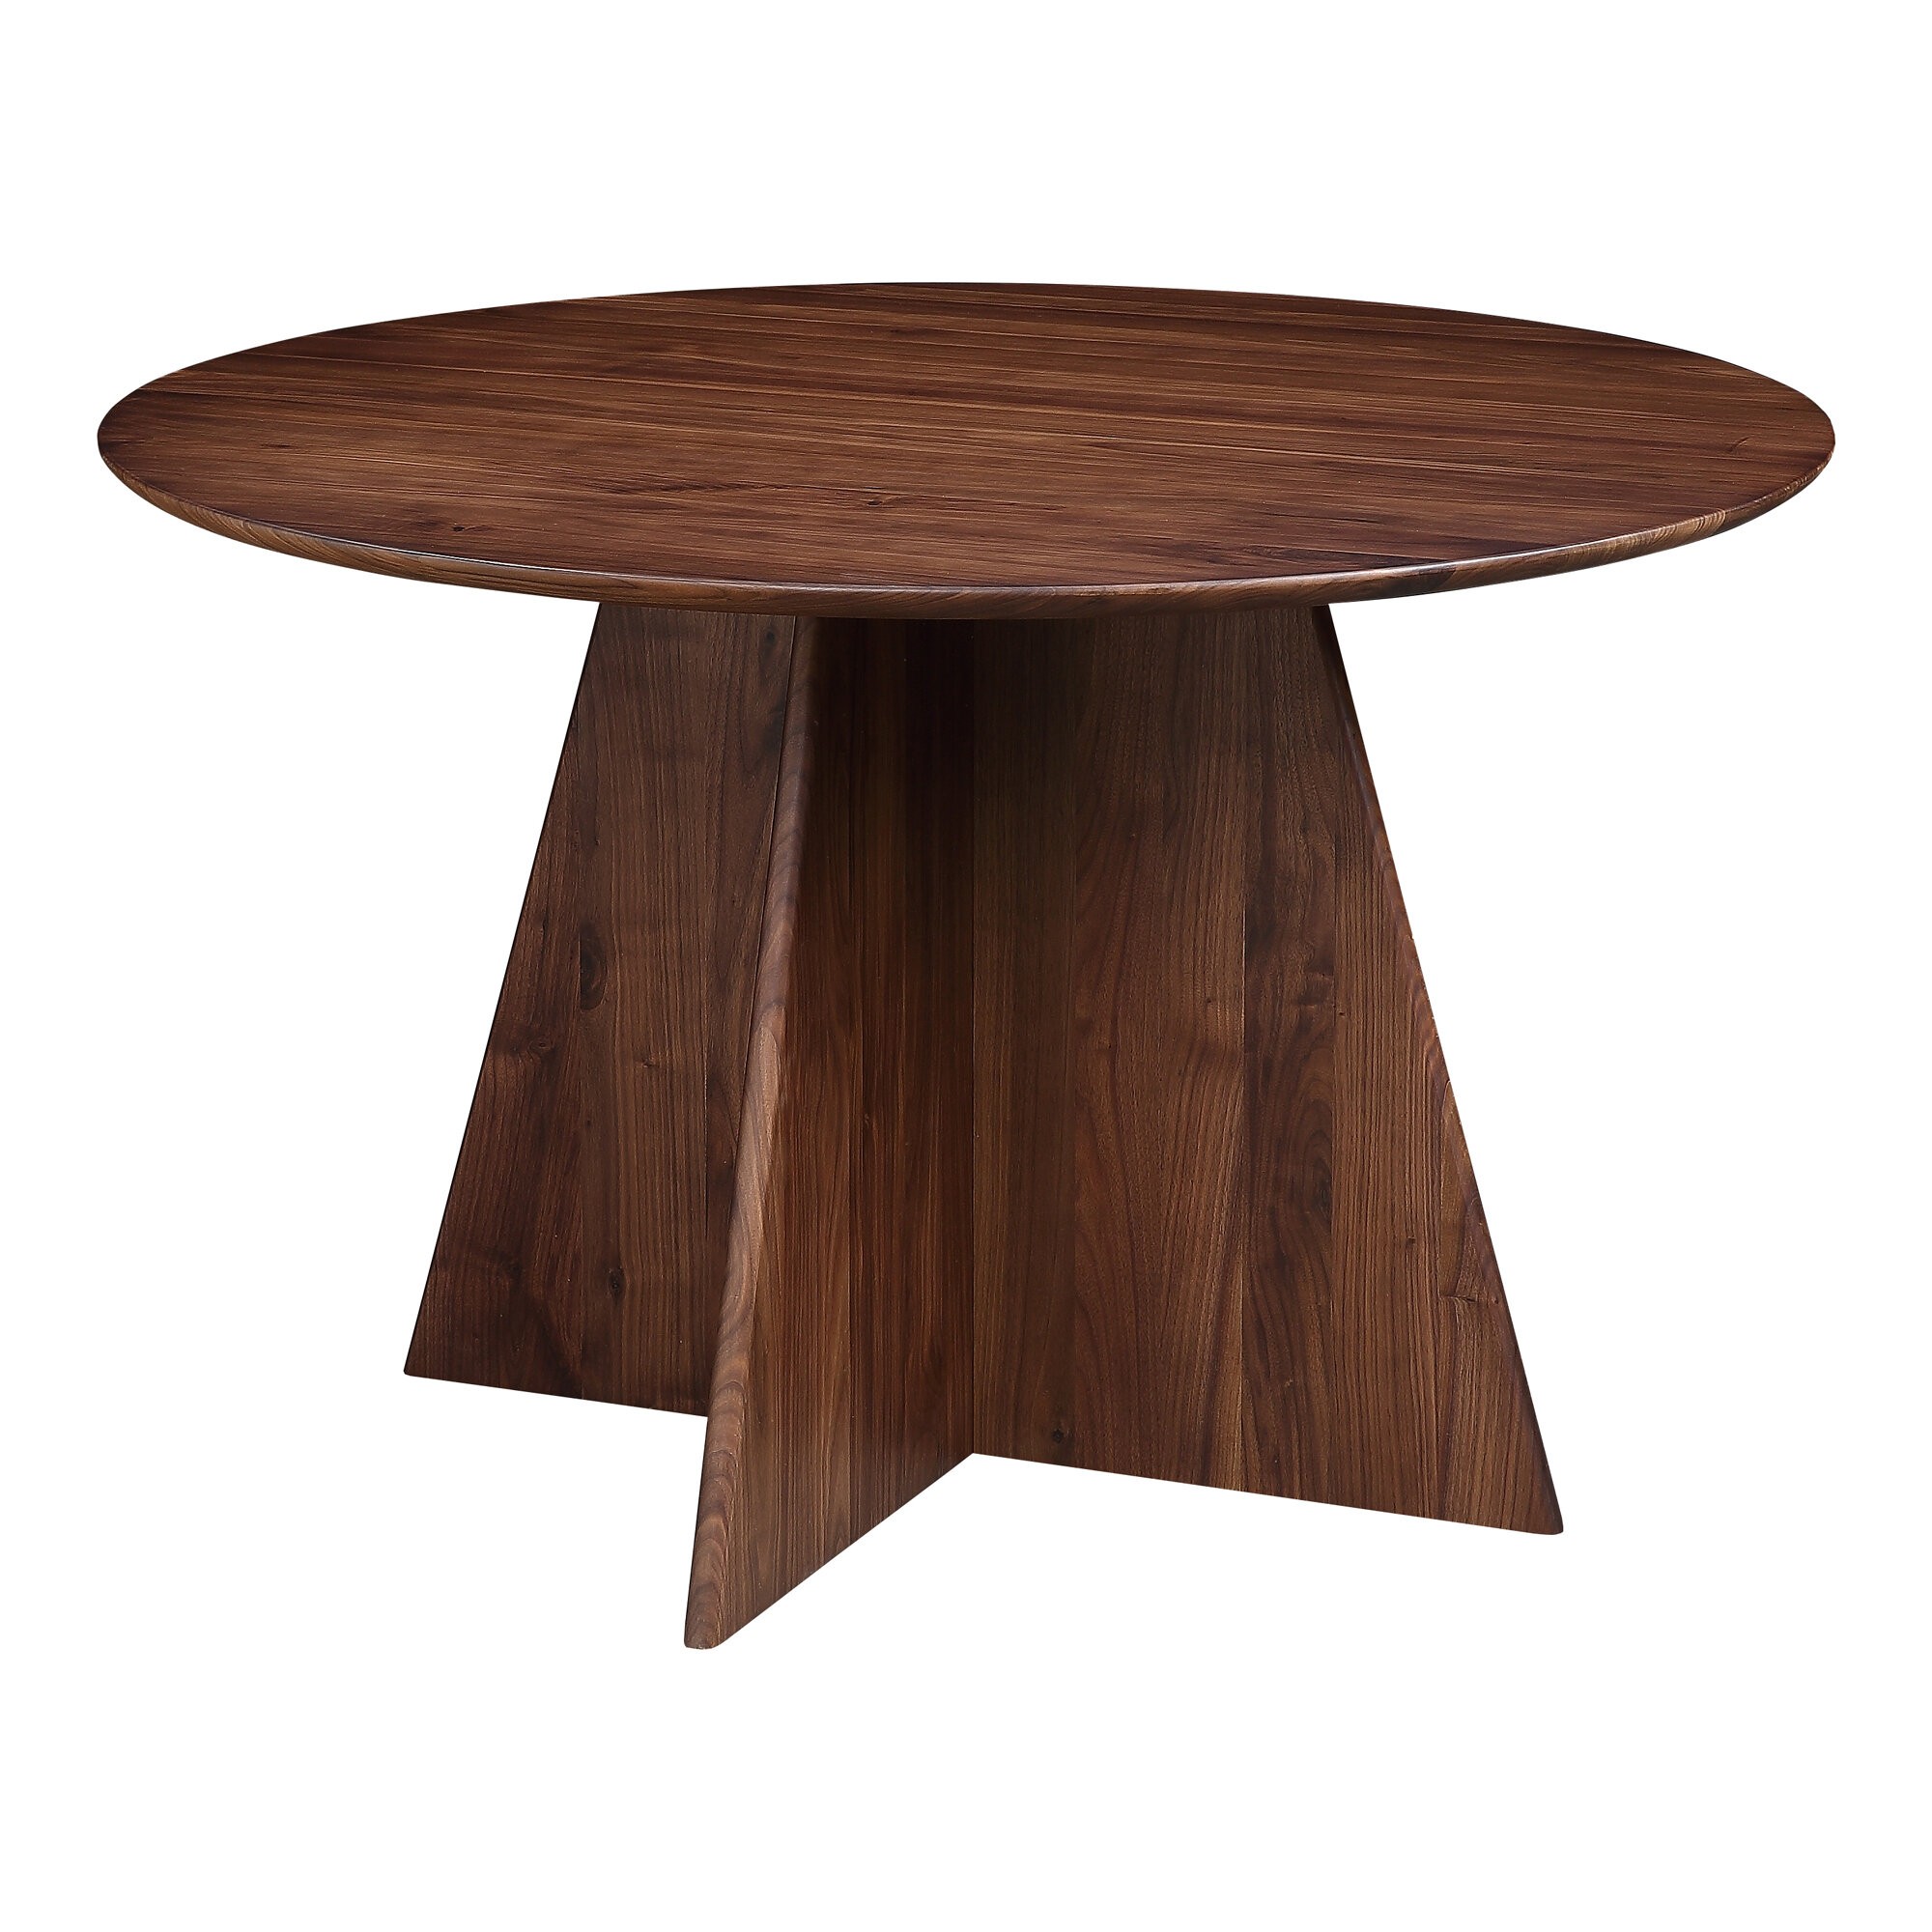 Barajas Walnut Solid Wood Dining Table